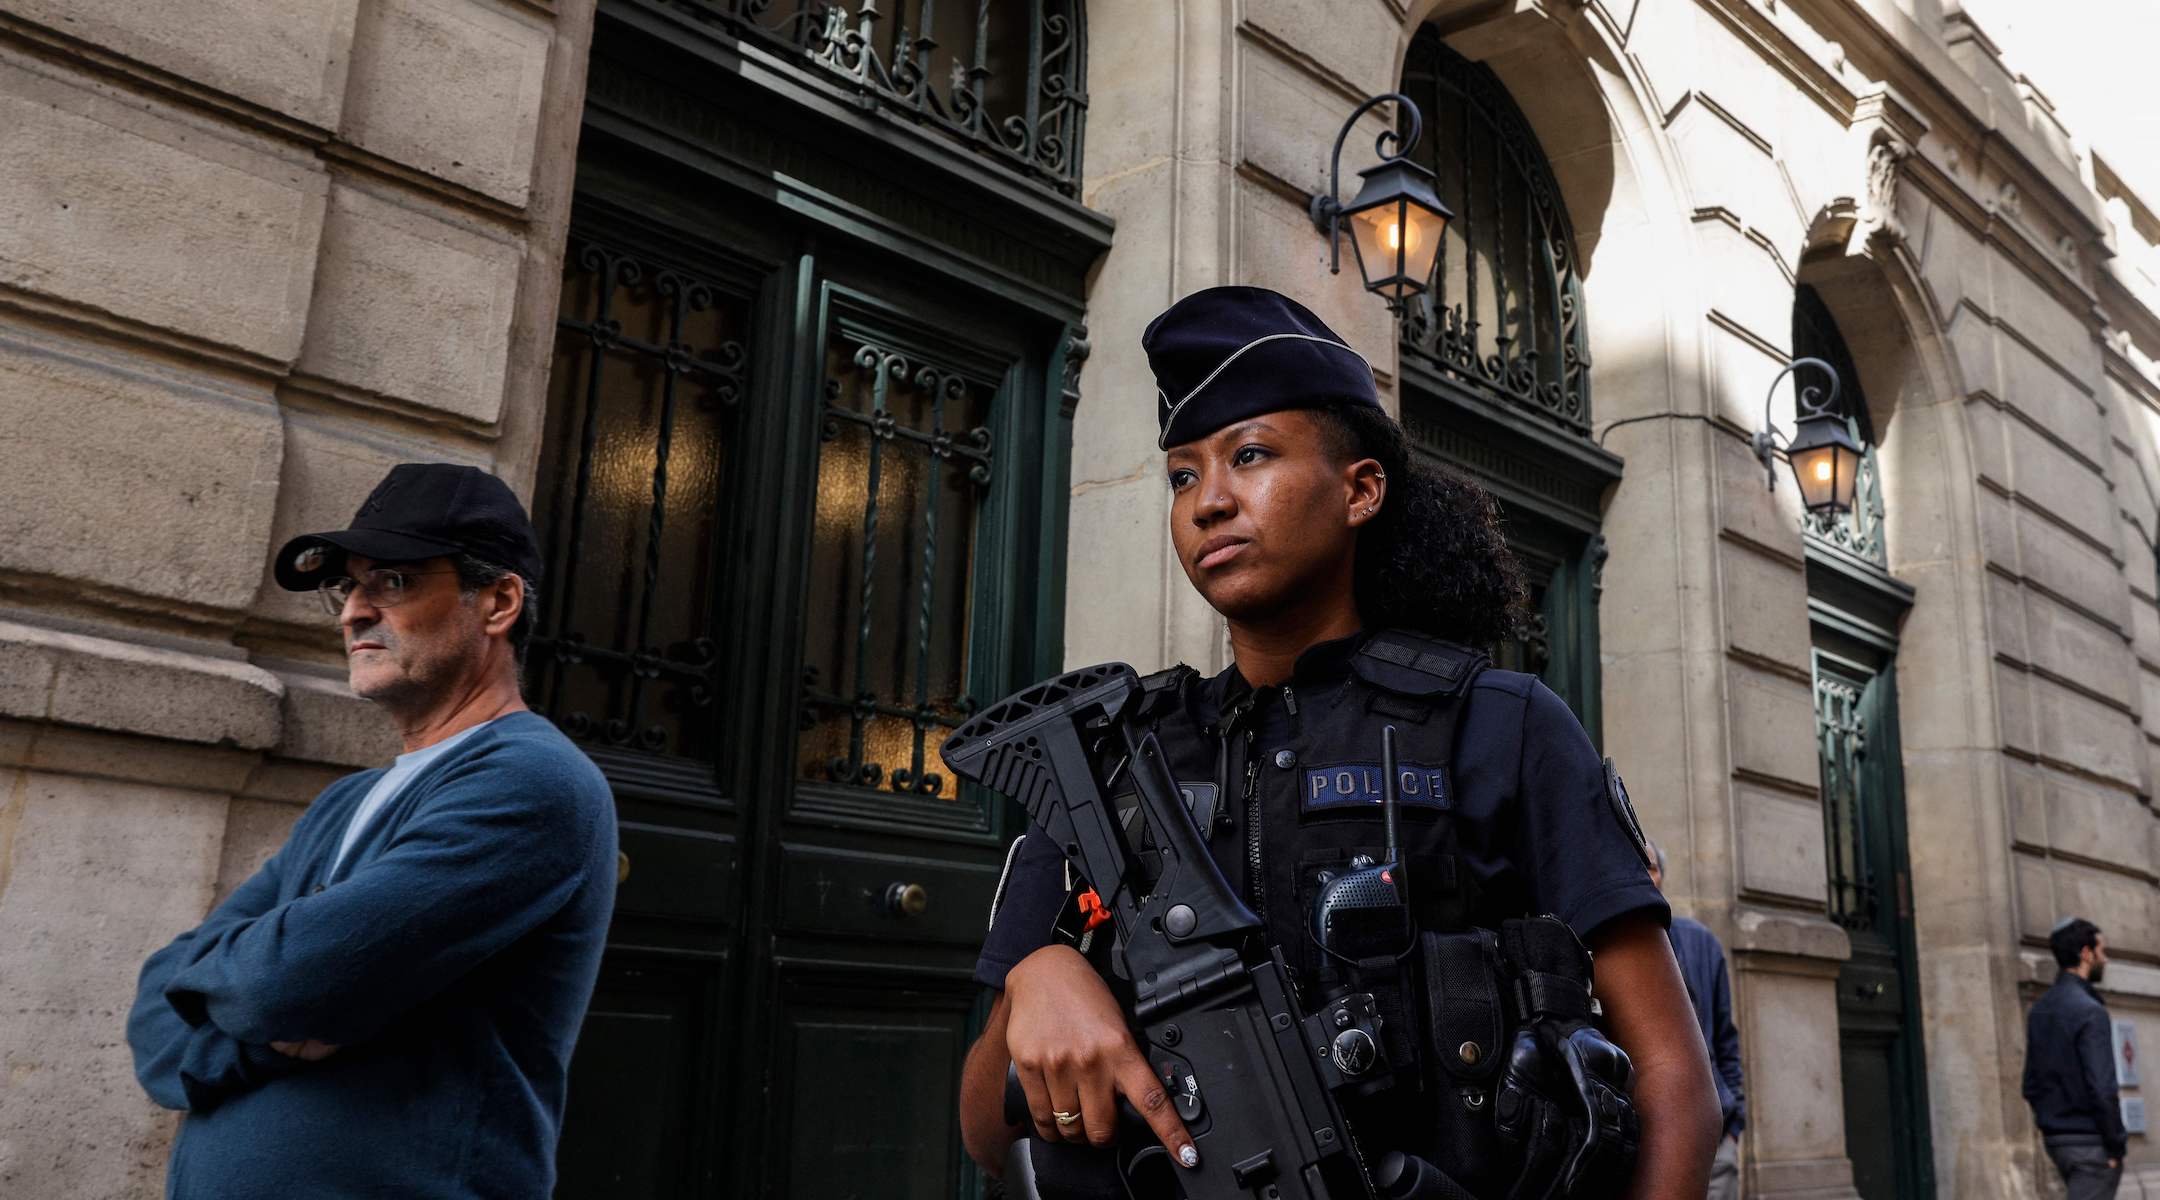 A French police officer patrols outside the Tournelles Synagogue in Paris after increased security measures were put in place at Jewish temples and schools, Oct. 8, 2023. (Geoffroy van der Hasselt/AFP via Getty Images)